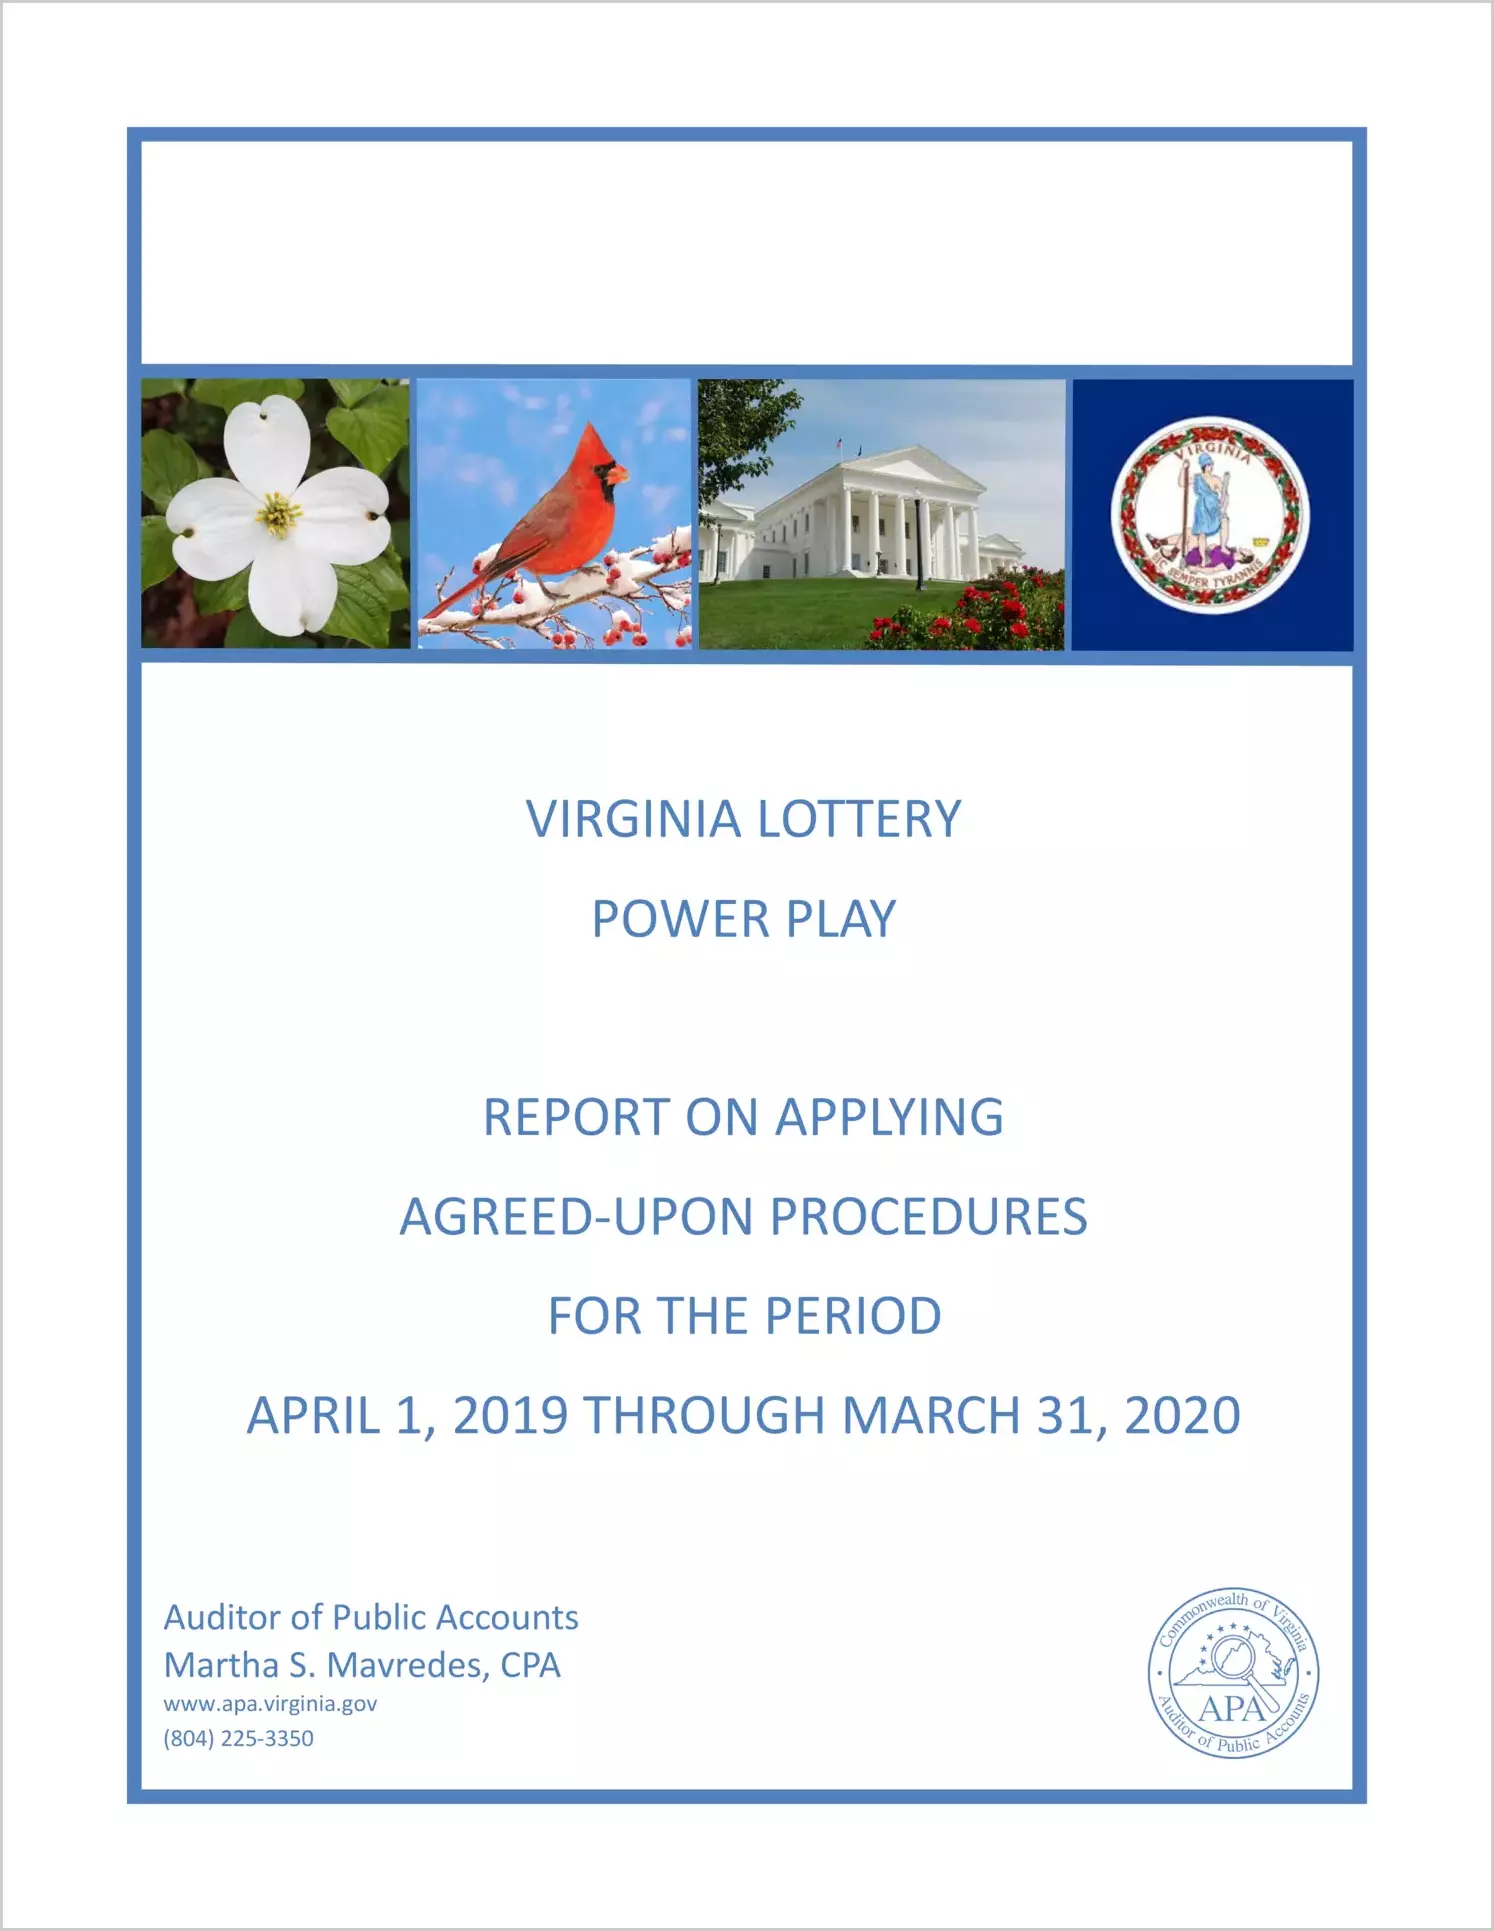 Viginia Lottery Power Play report on Applying Agreed Upon Procedures for the period April 1, 2019 through March 31, 2020